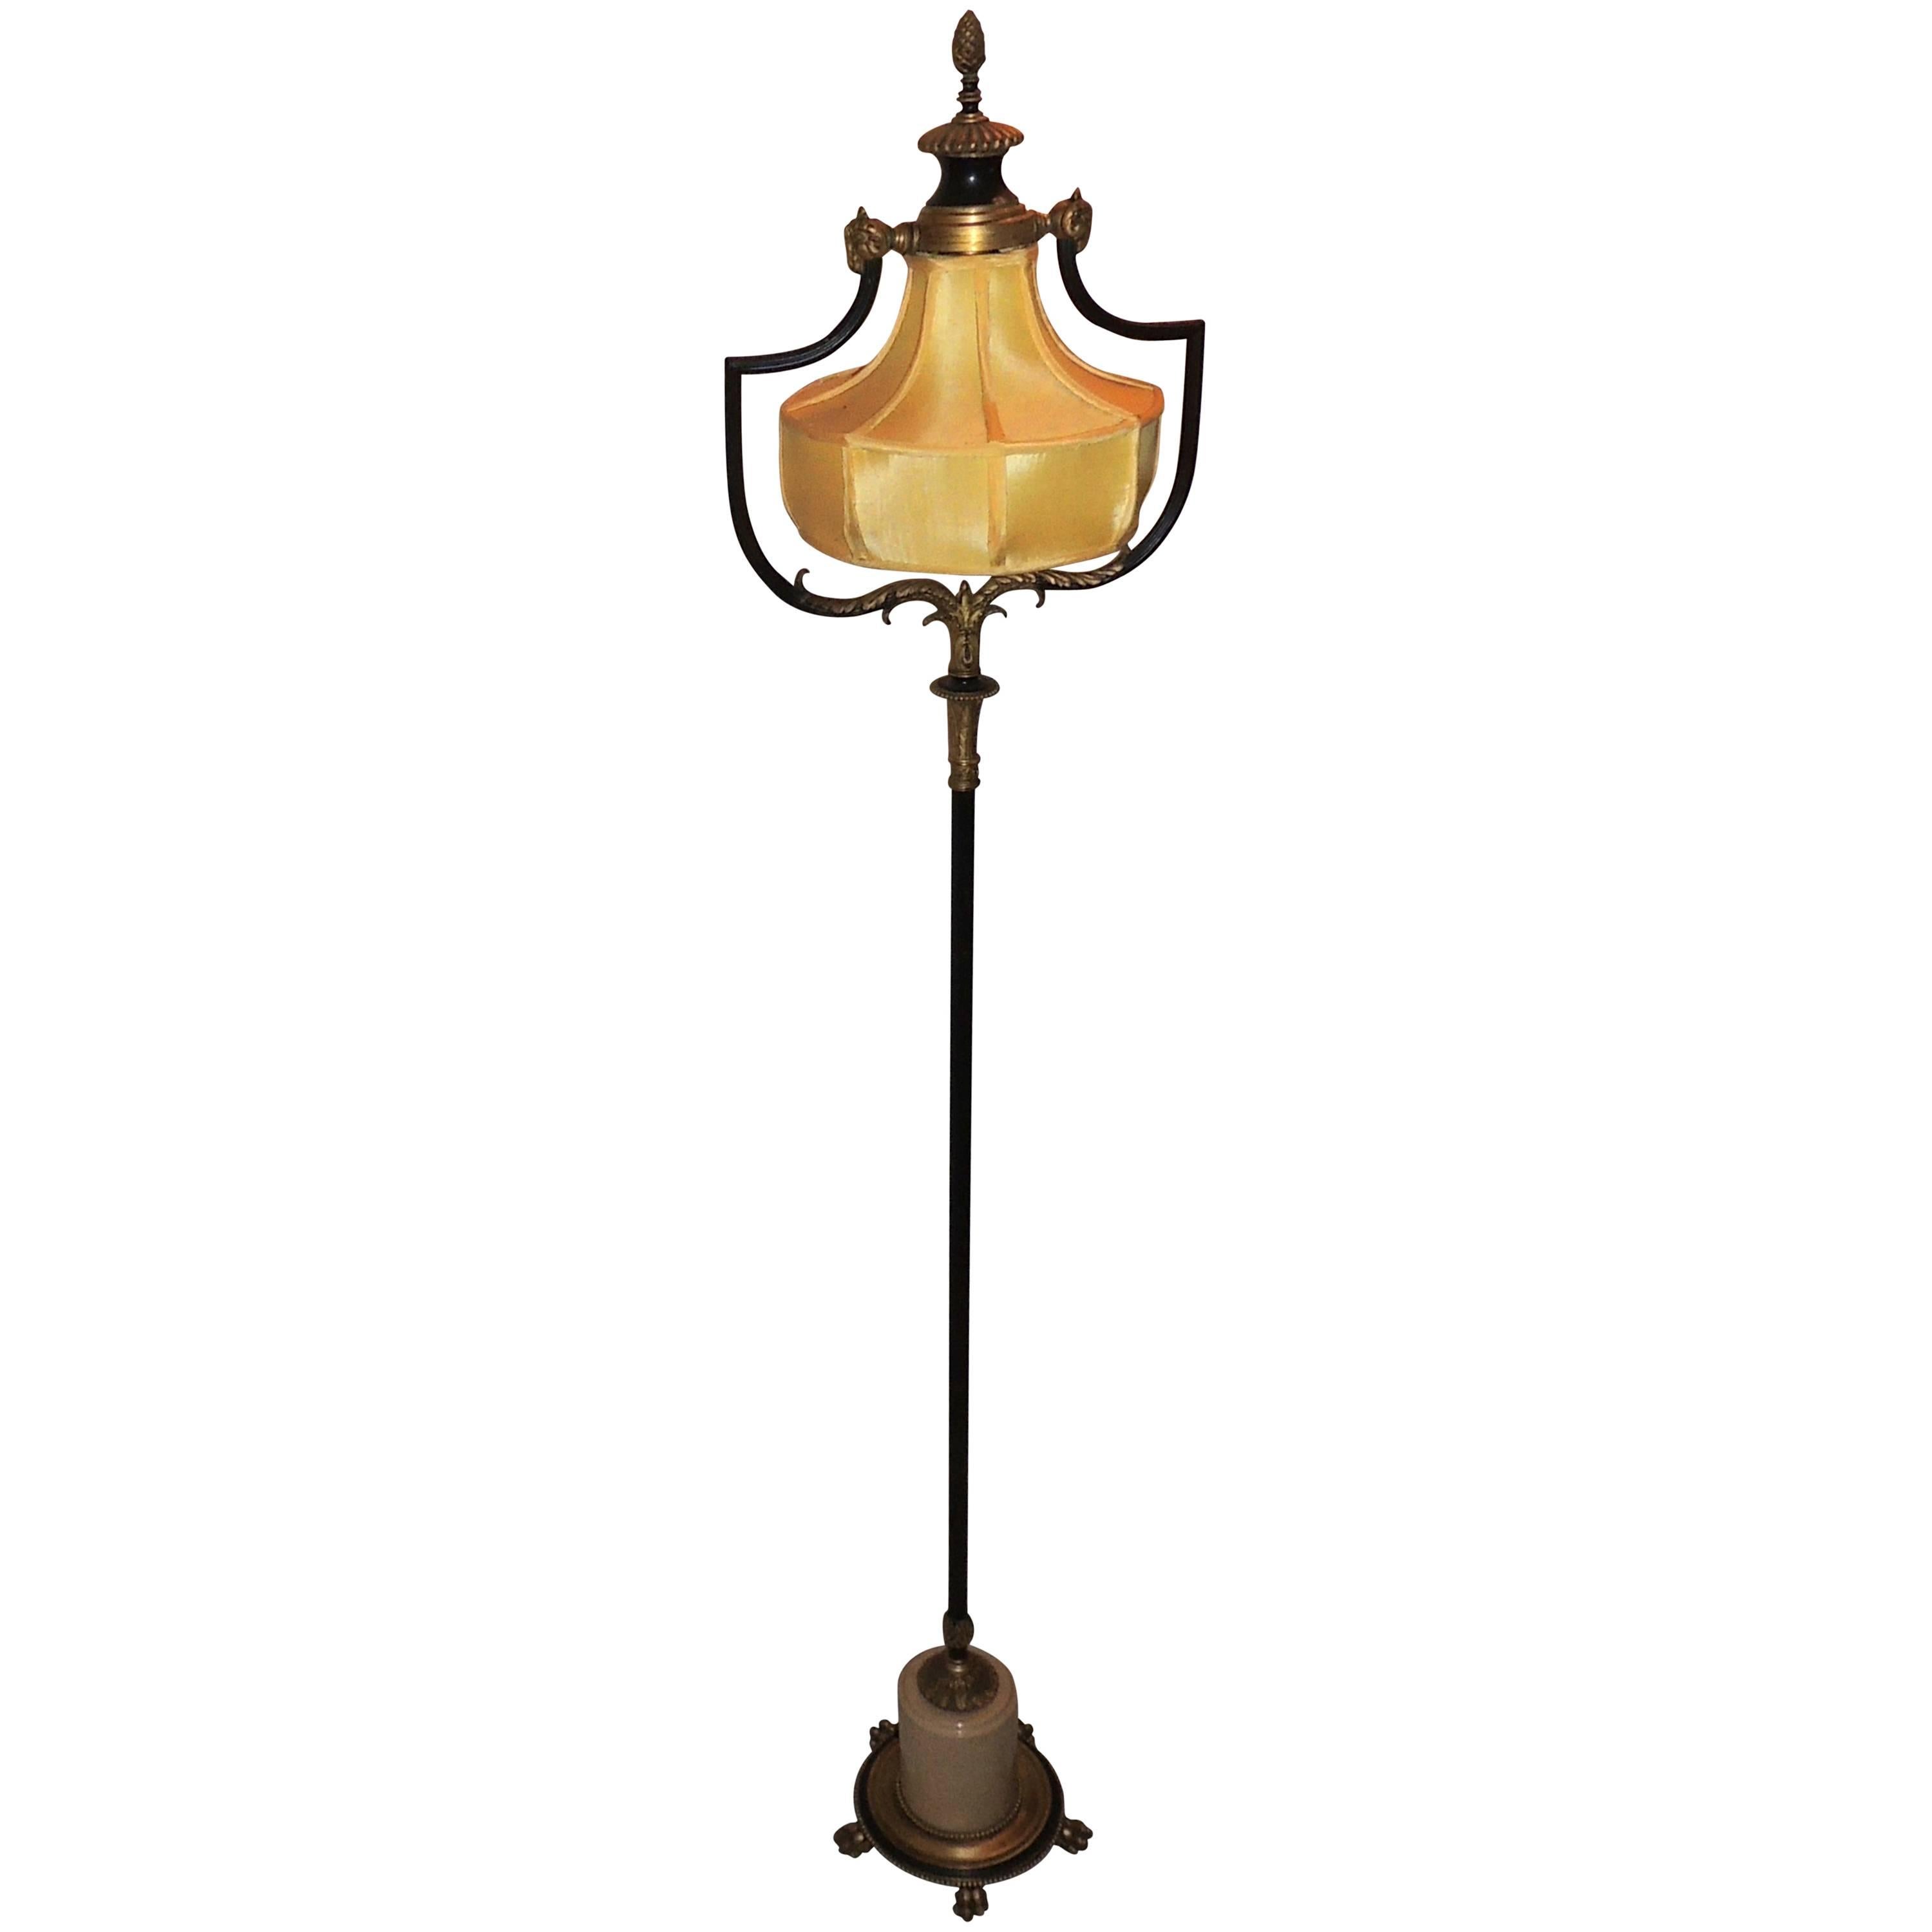 Wonderful Patinated Gilt Bronze Caldwell Floor Lamp Silk Shade Marble Claw Foot For Sale